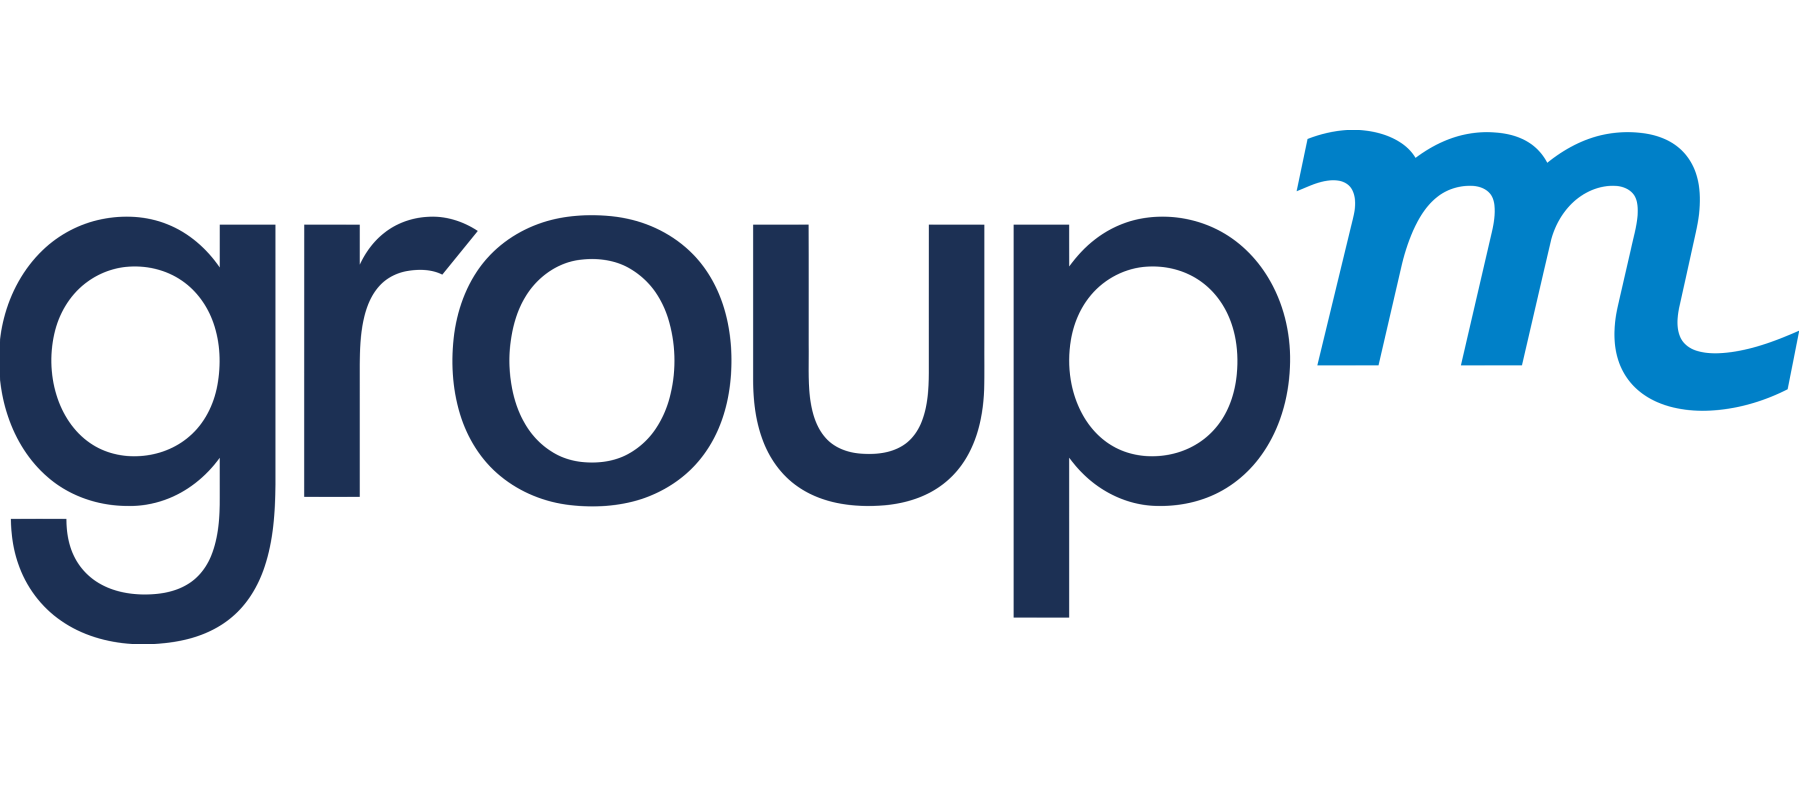 GroupM enhances creator content amplification capabilities globally with Amazon Ads